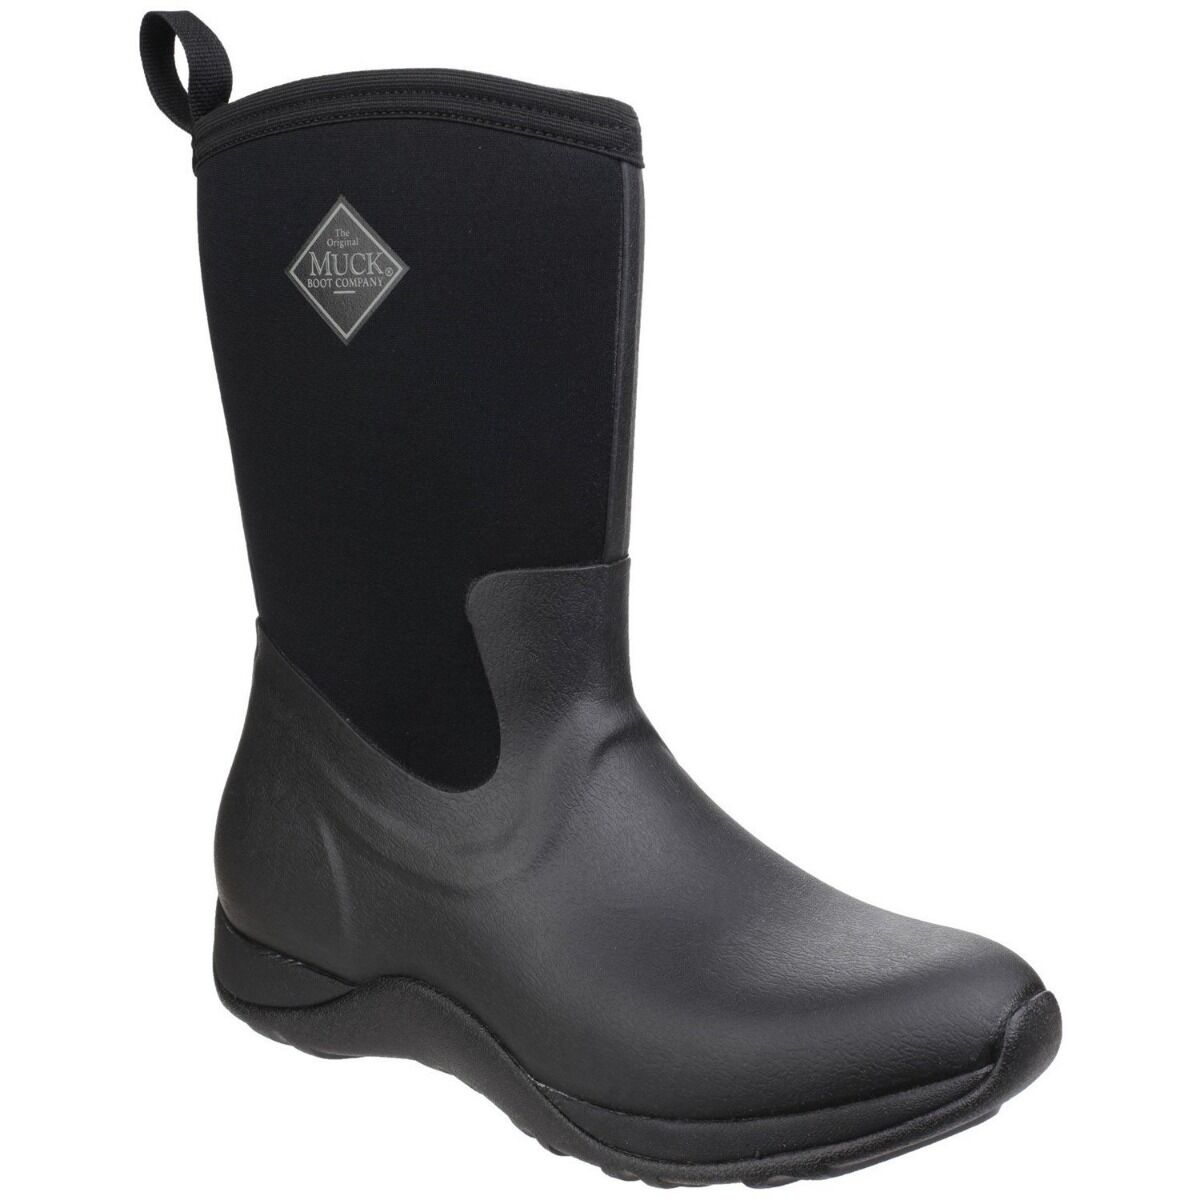 muck boots black friday